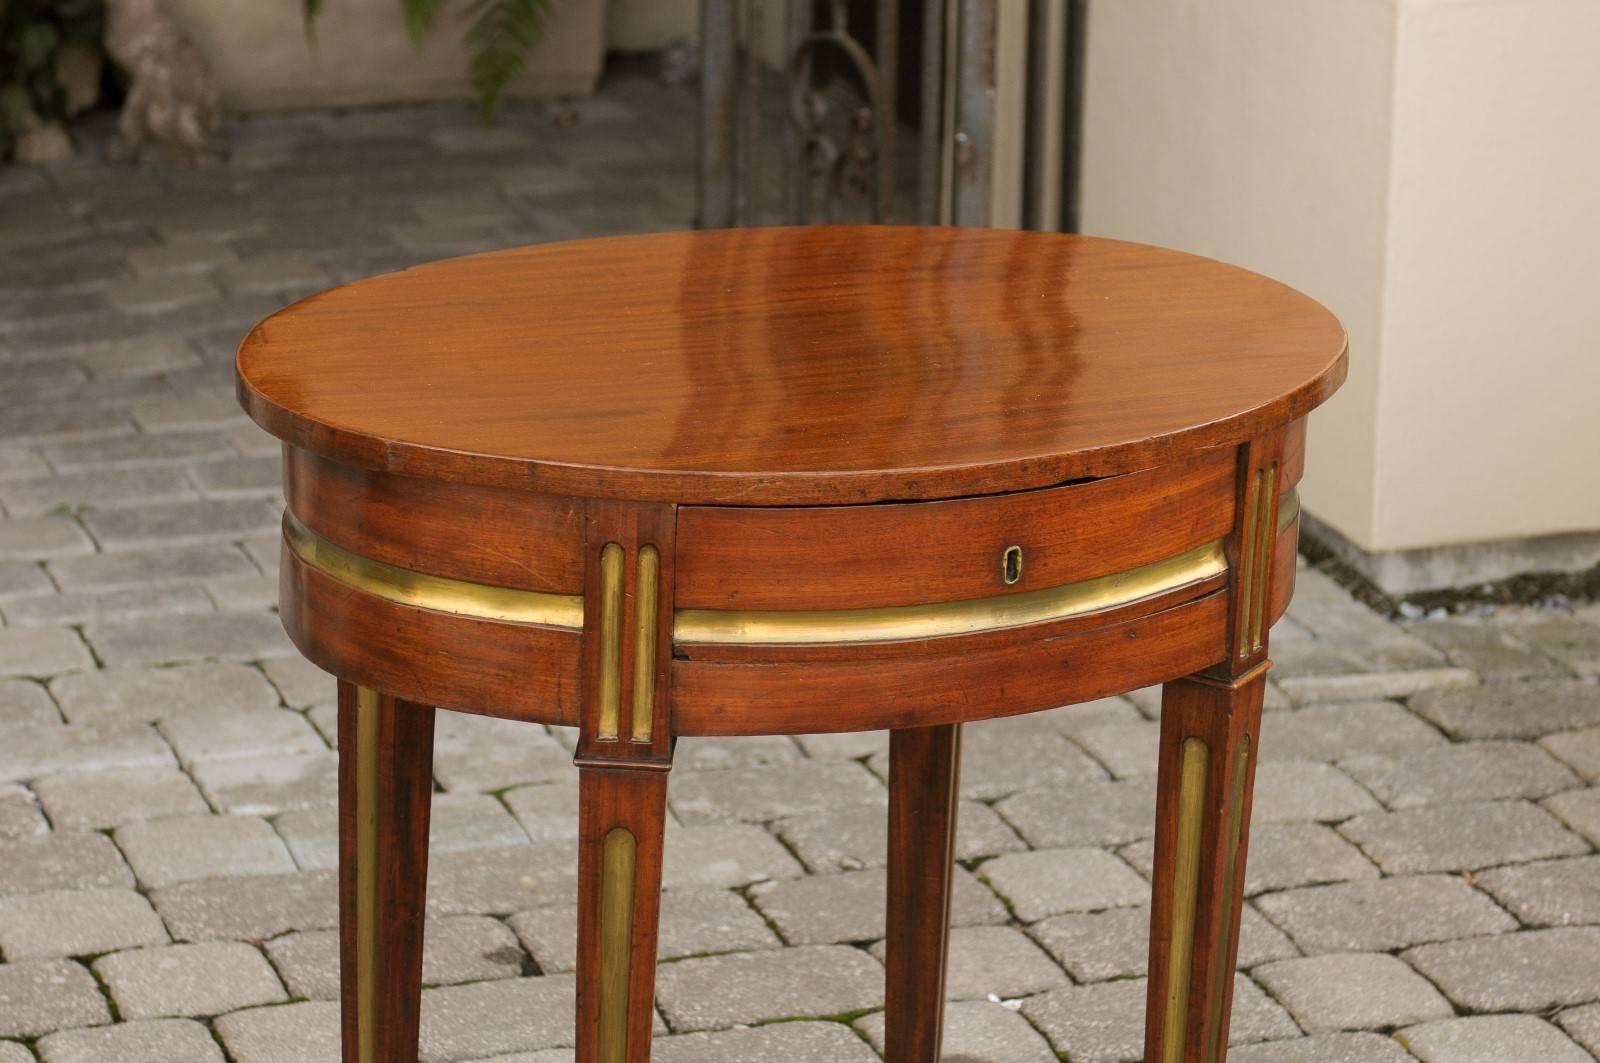 19th Century Russian 19th century Mahogany Oval Side Table with Brass Inlaid Elements 